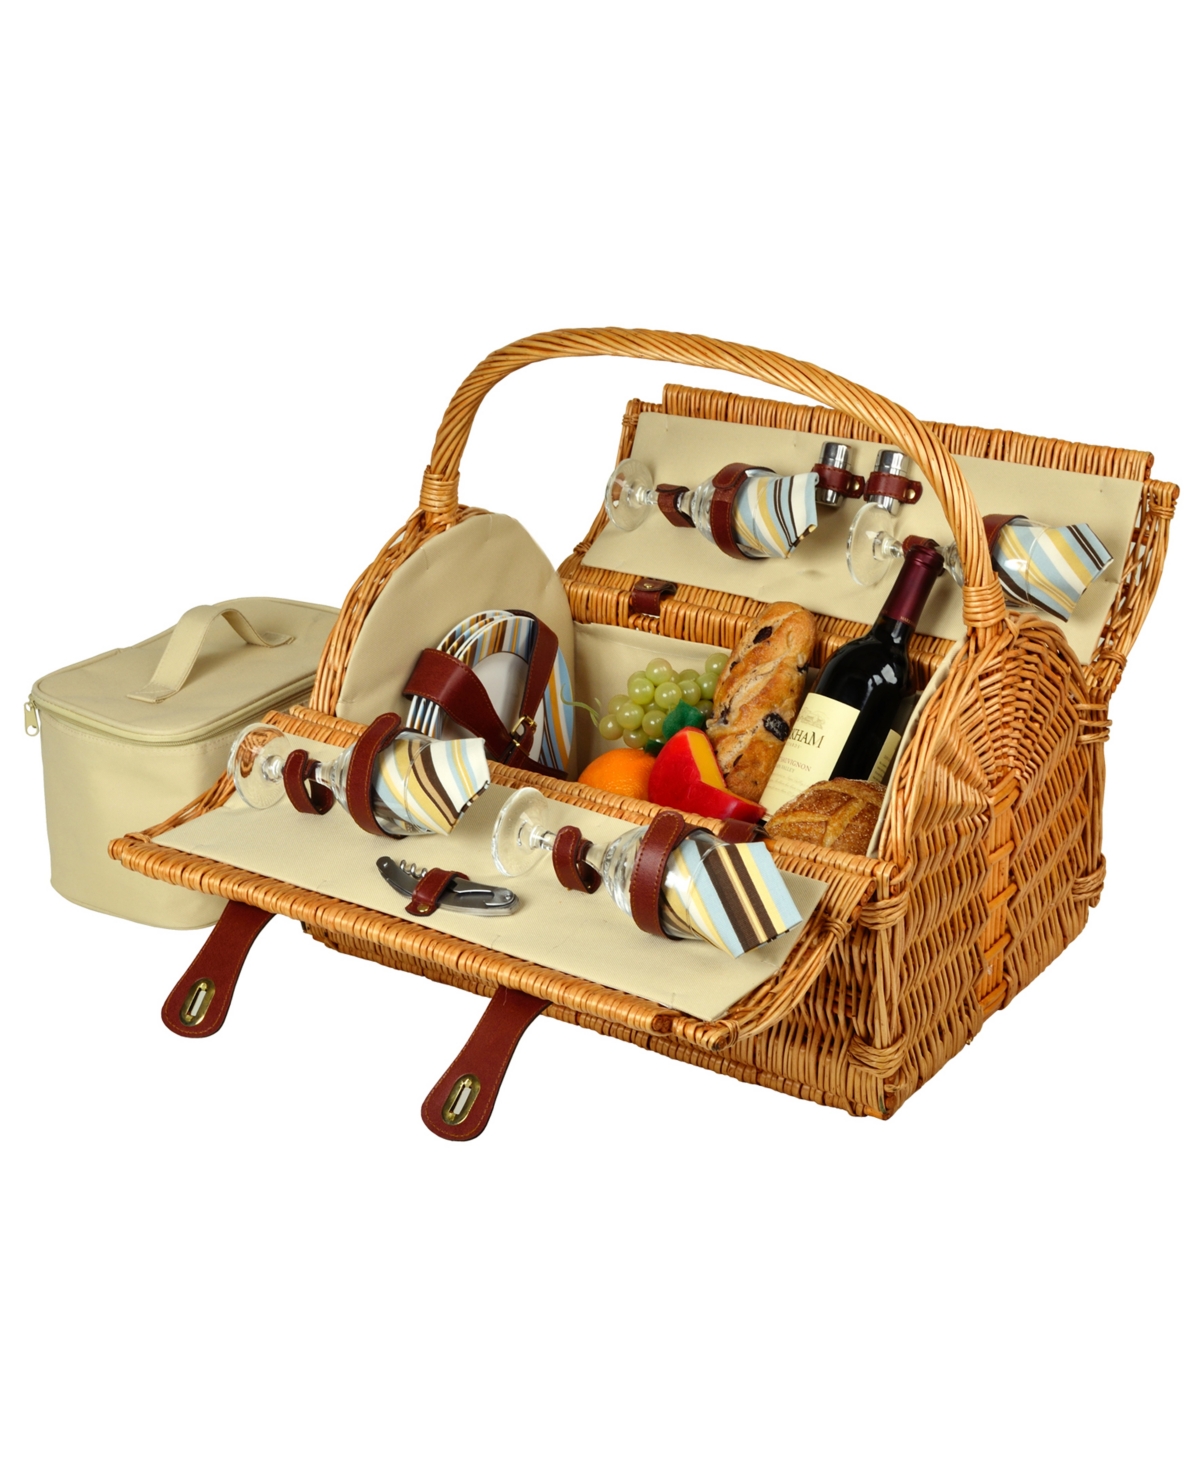 Yorkshire Willow Picnic Basket with Service for 4 - Turquoise